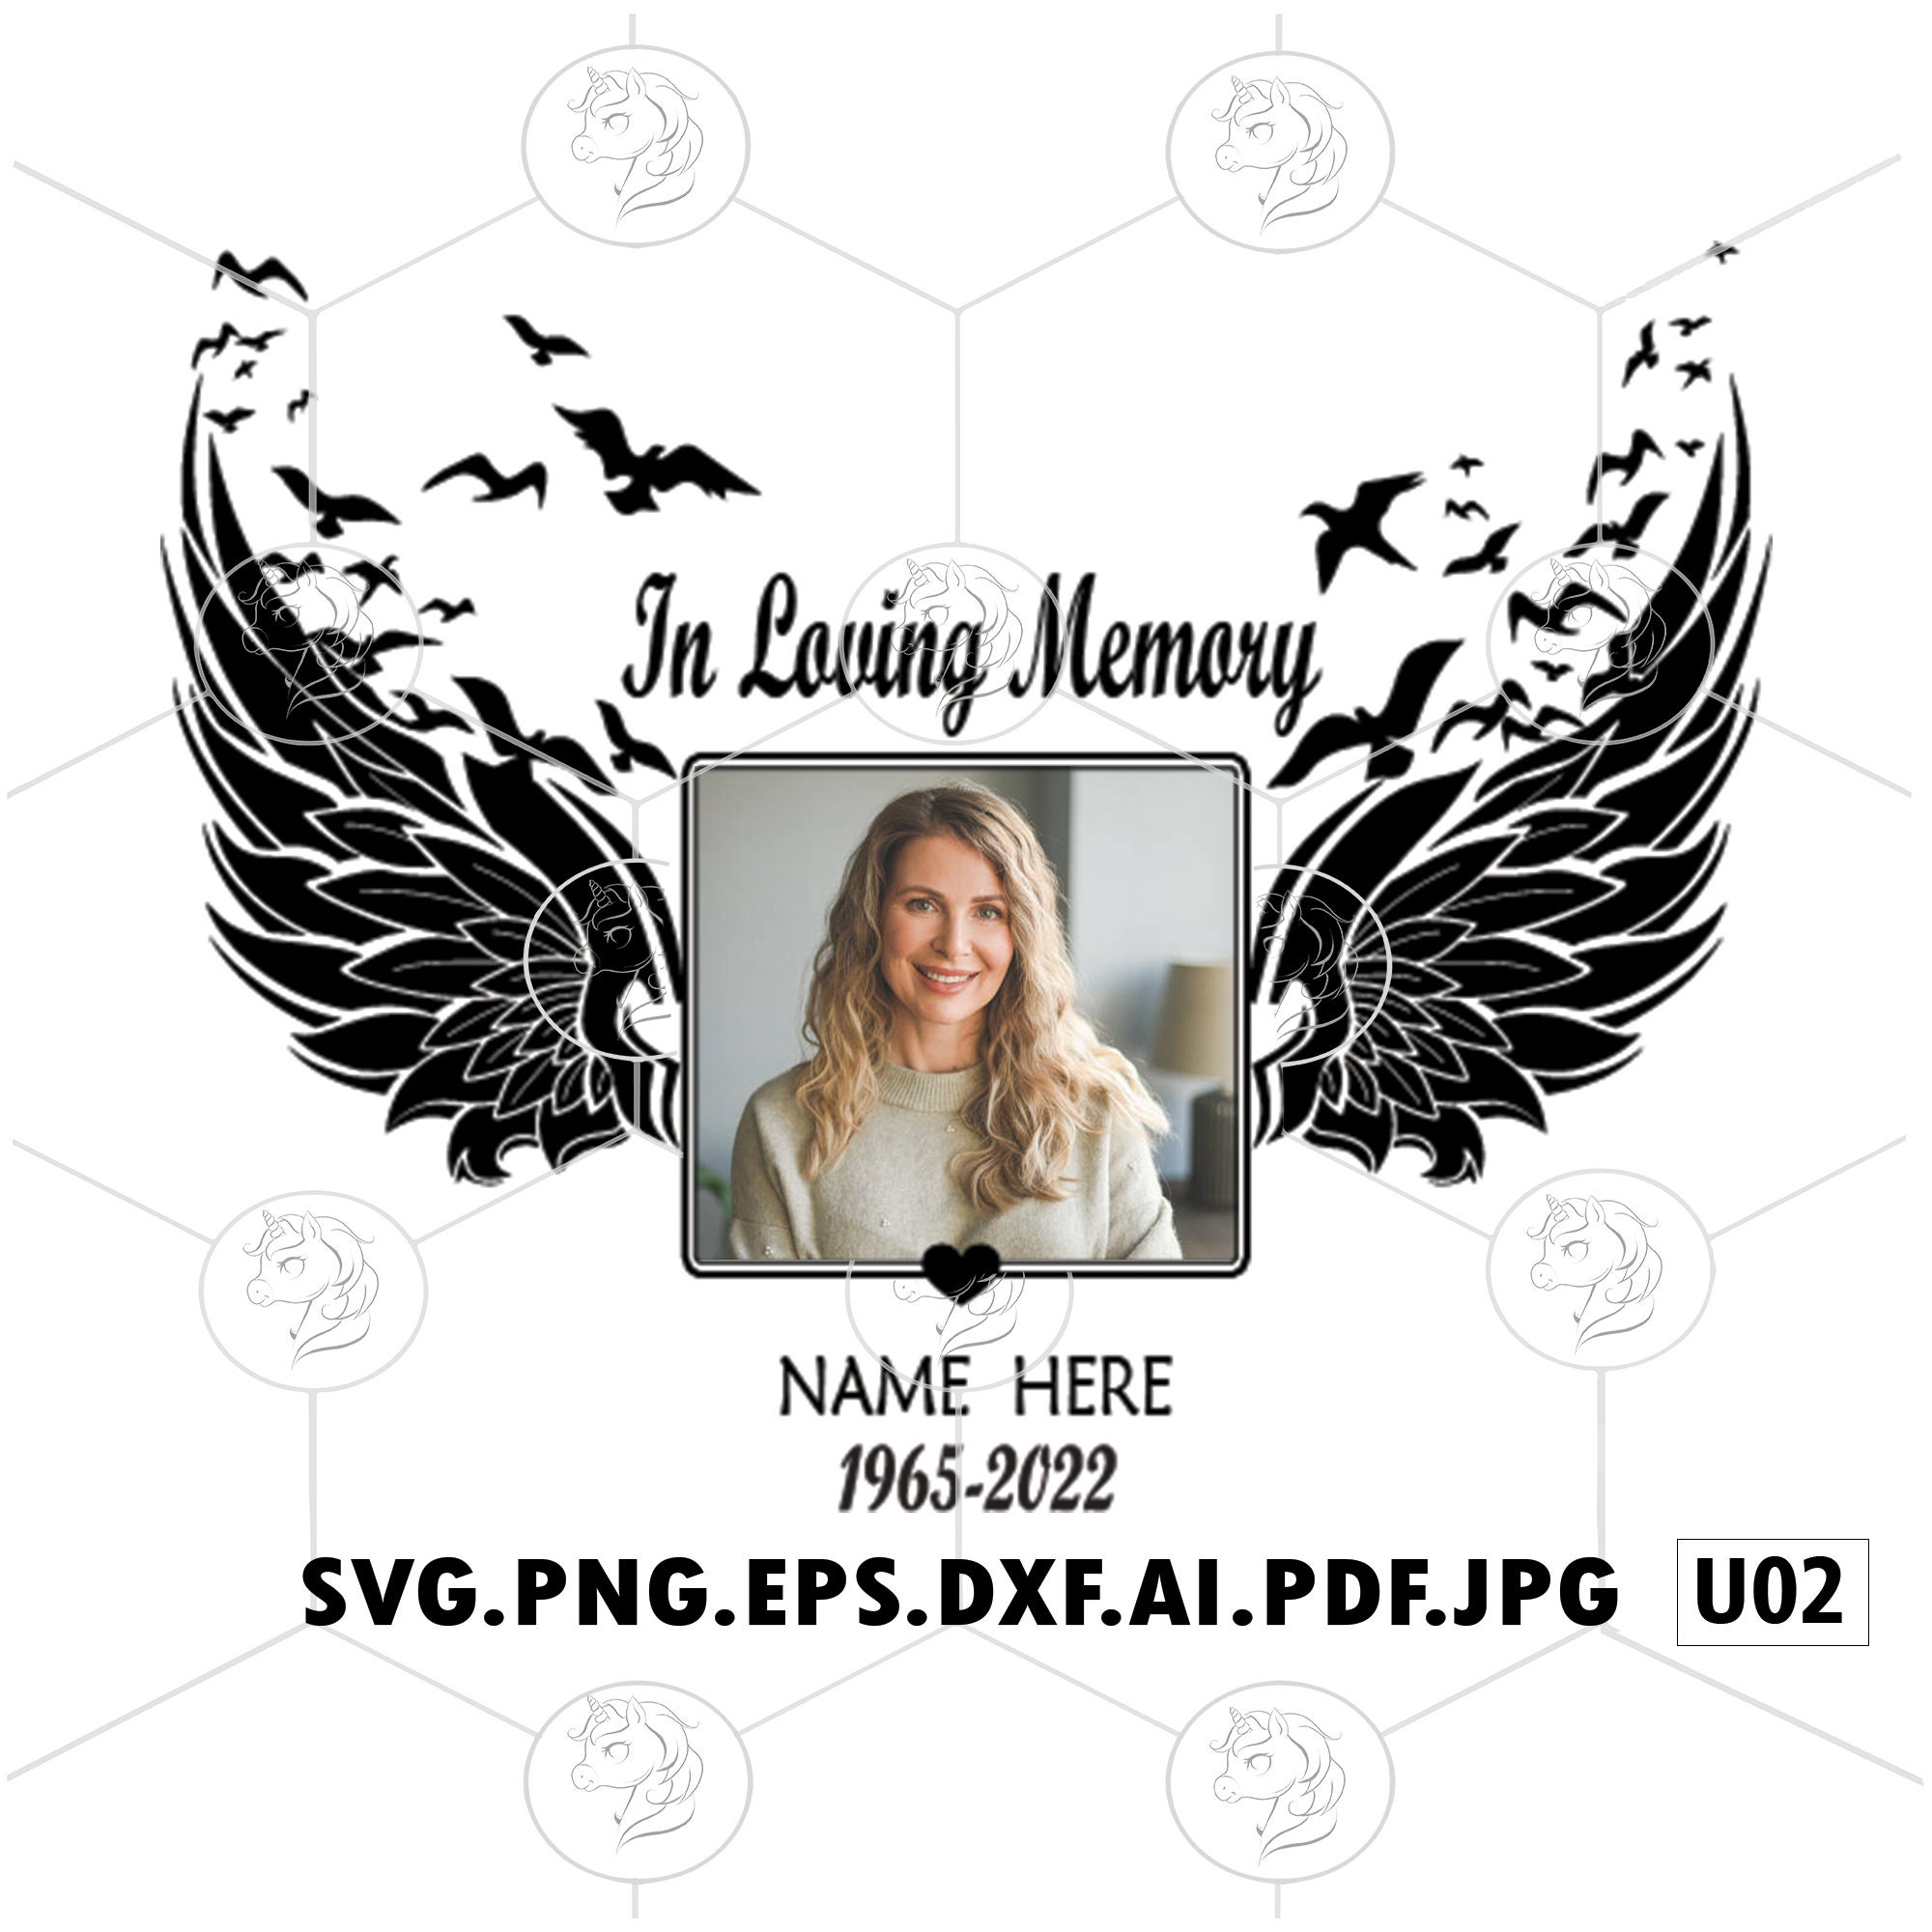 Rest in Peace Svg/eps/png/dxf/jpg/pdf Rip Svgpeace Dove 